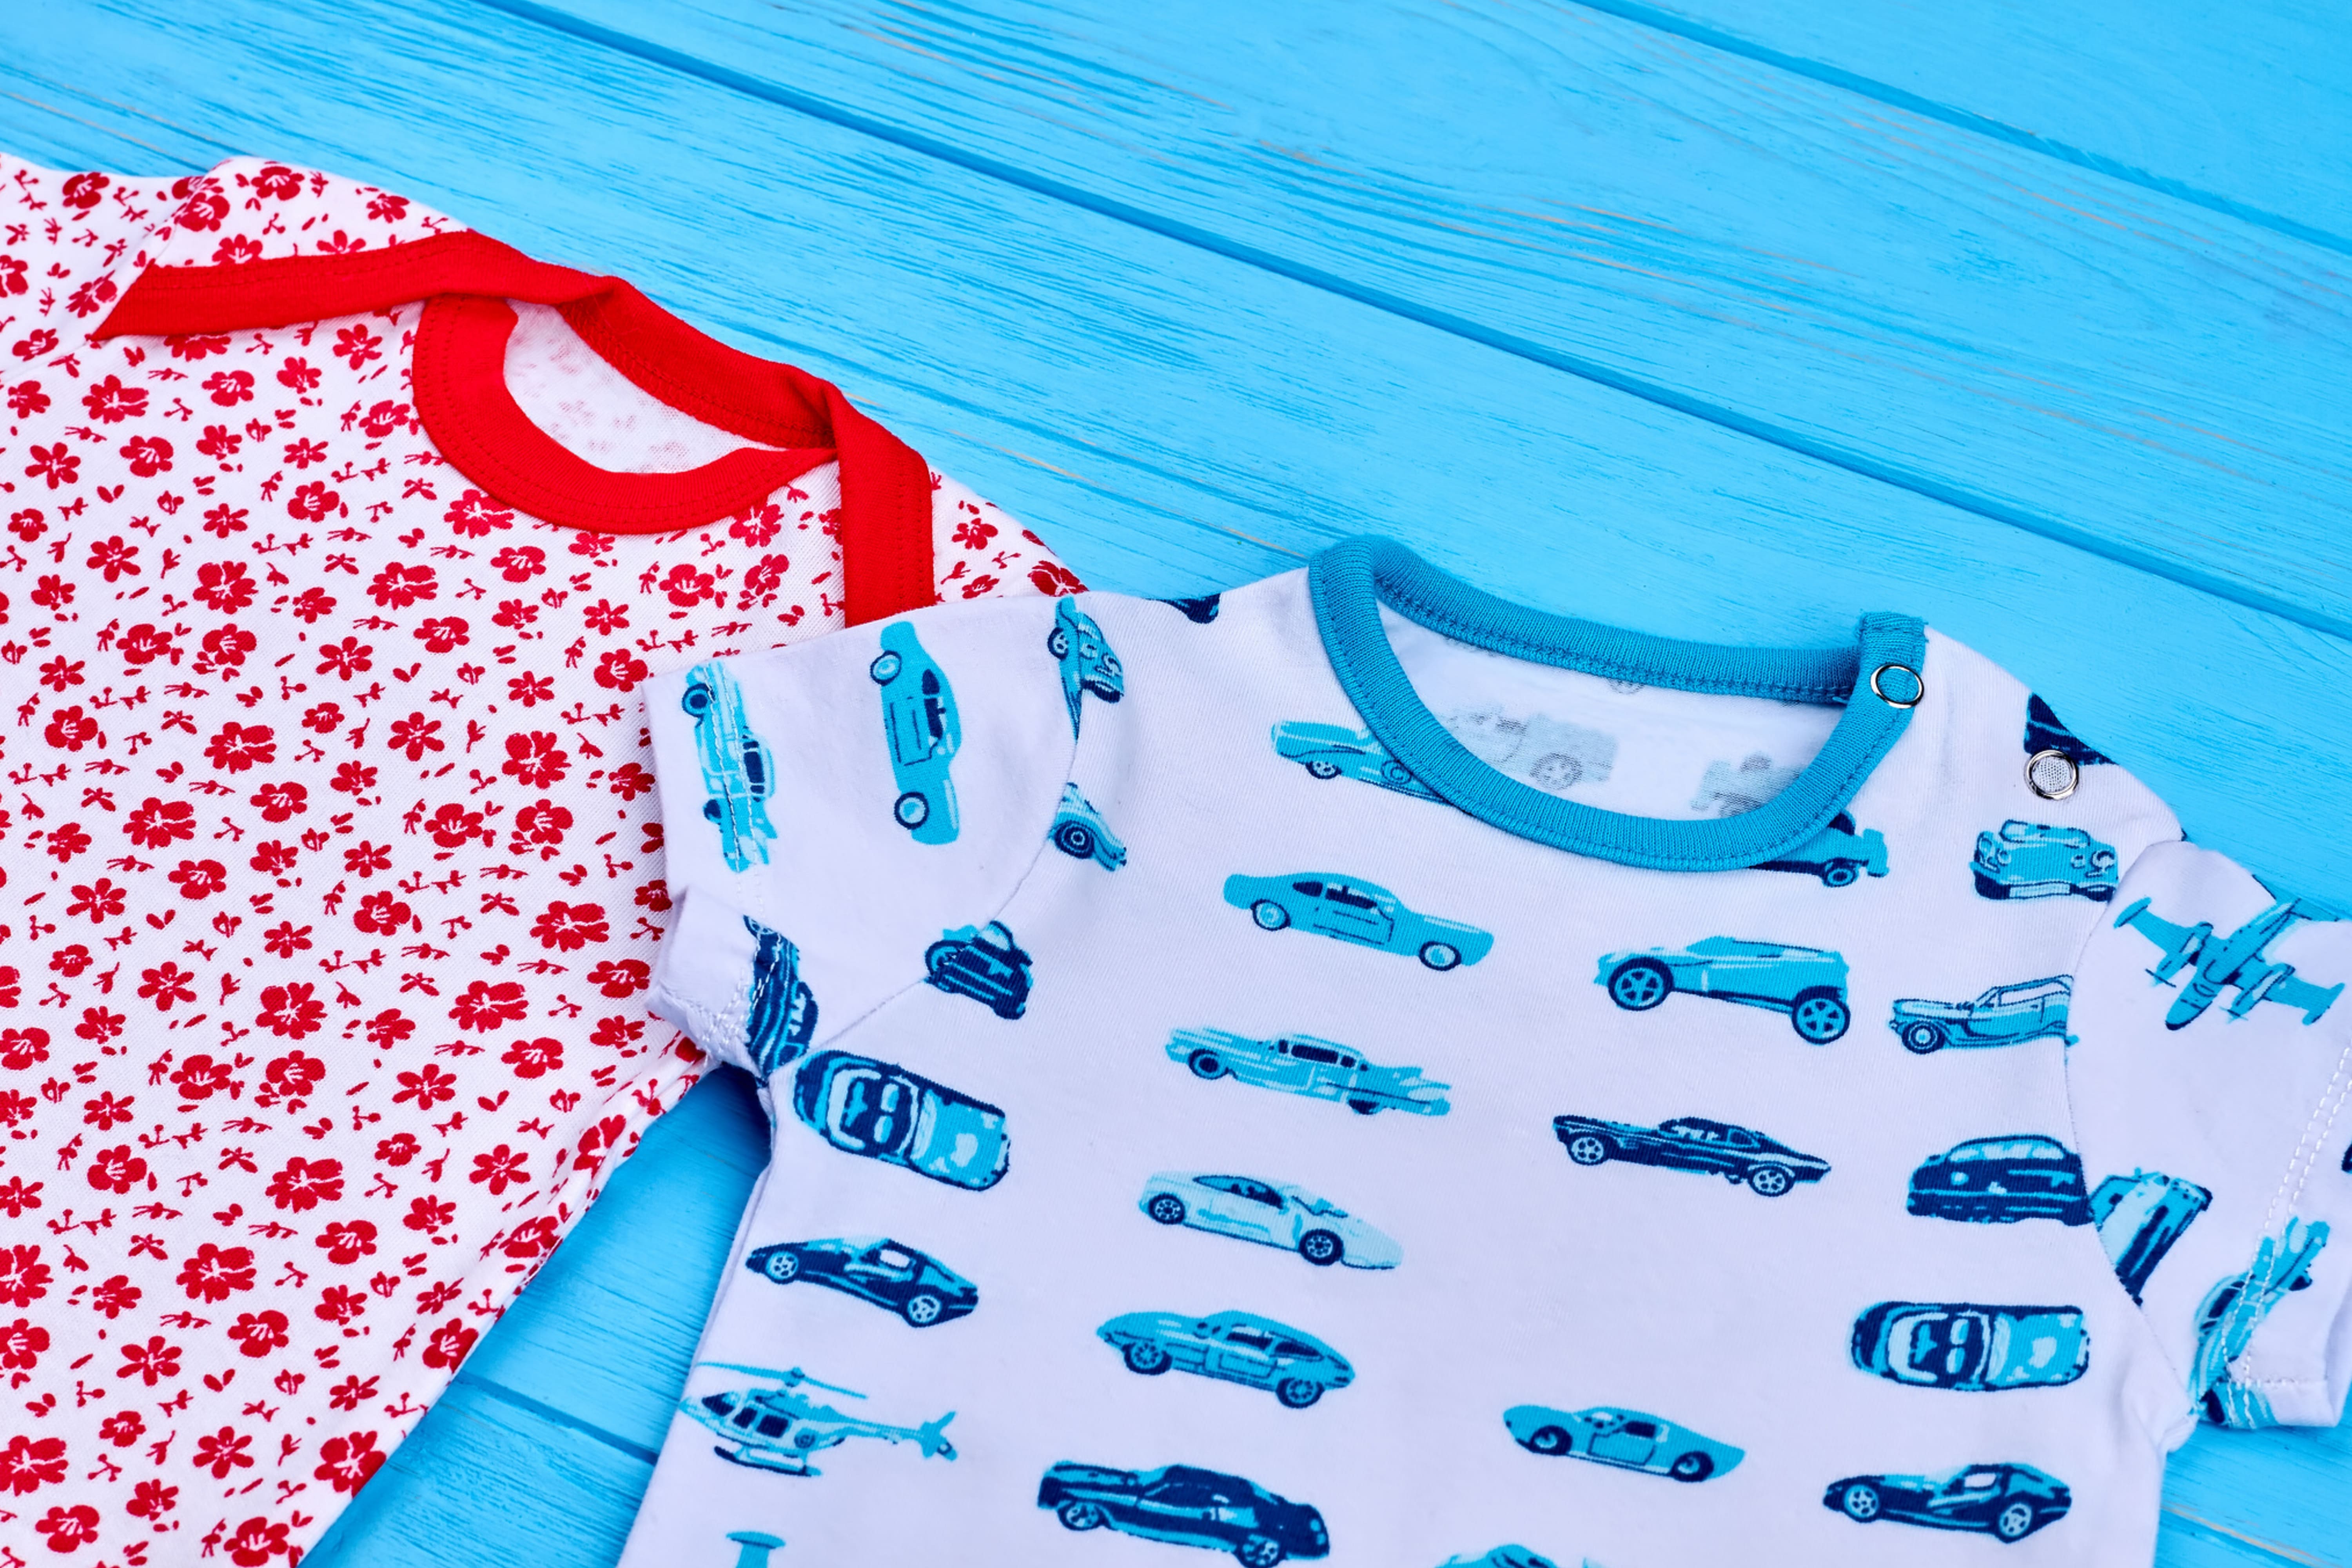 How to Wash & Care for Your Custom Printed Clothing